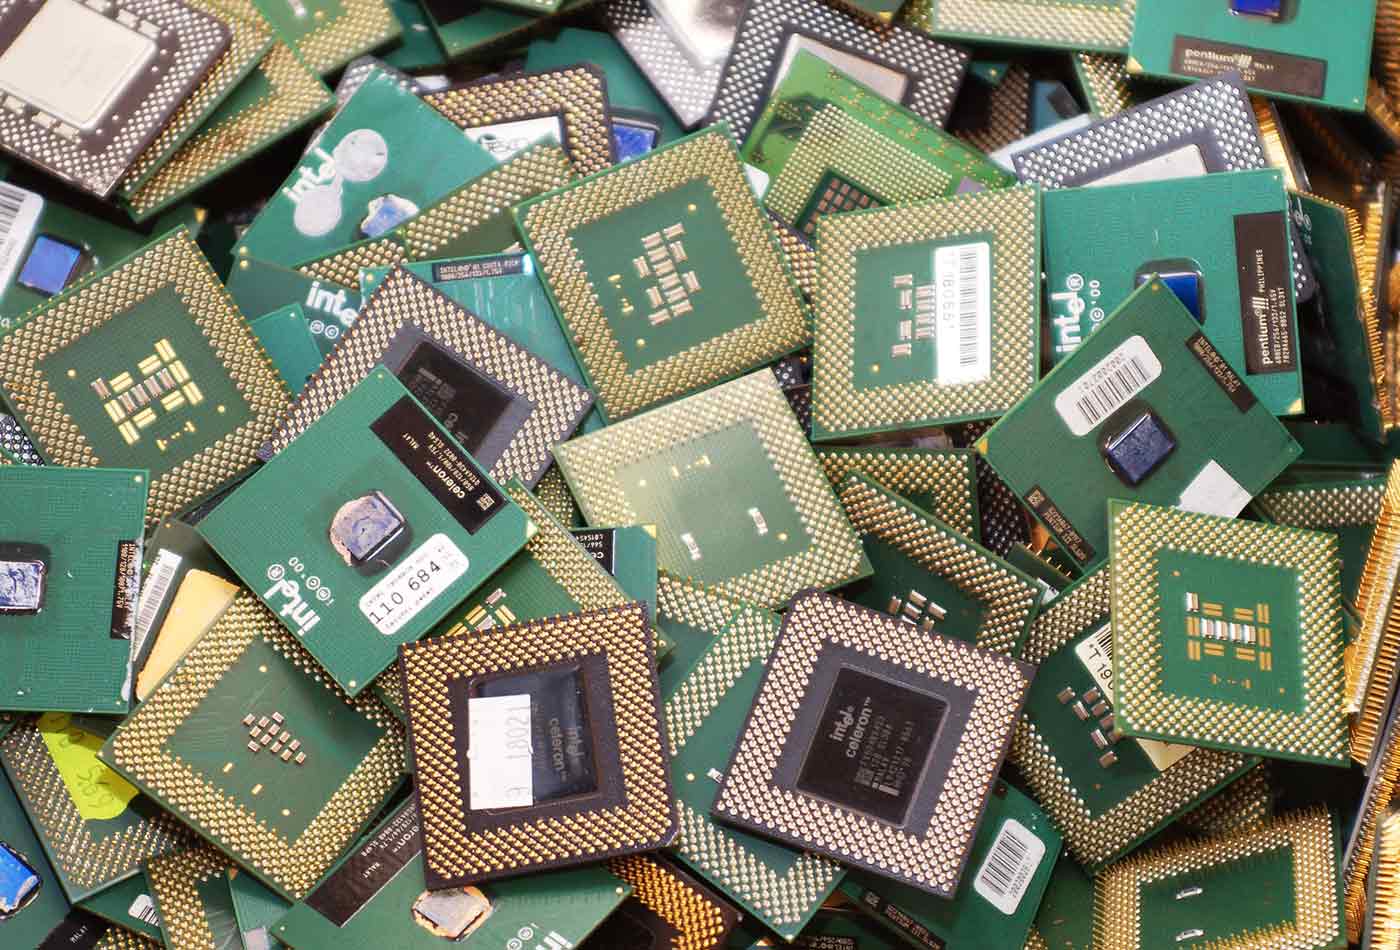 CPUs from retired computers waiting for recyclation